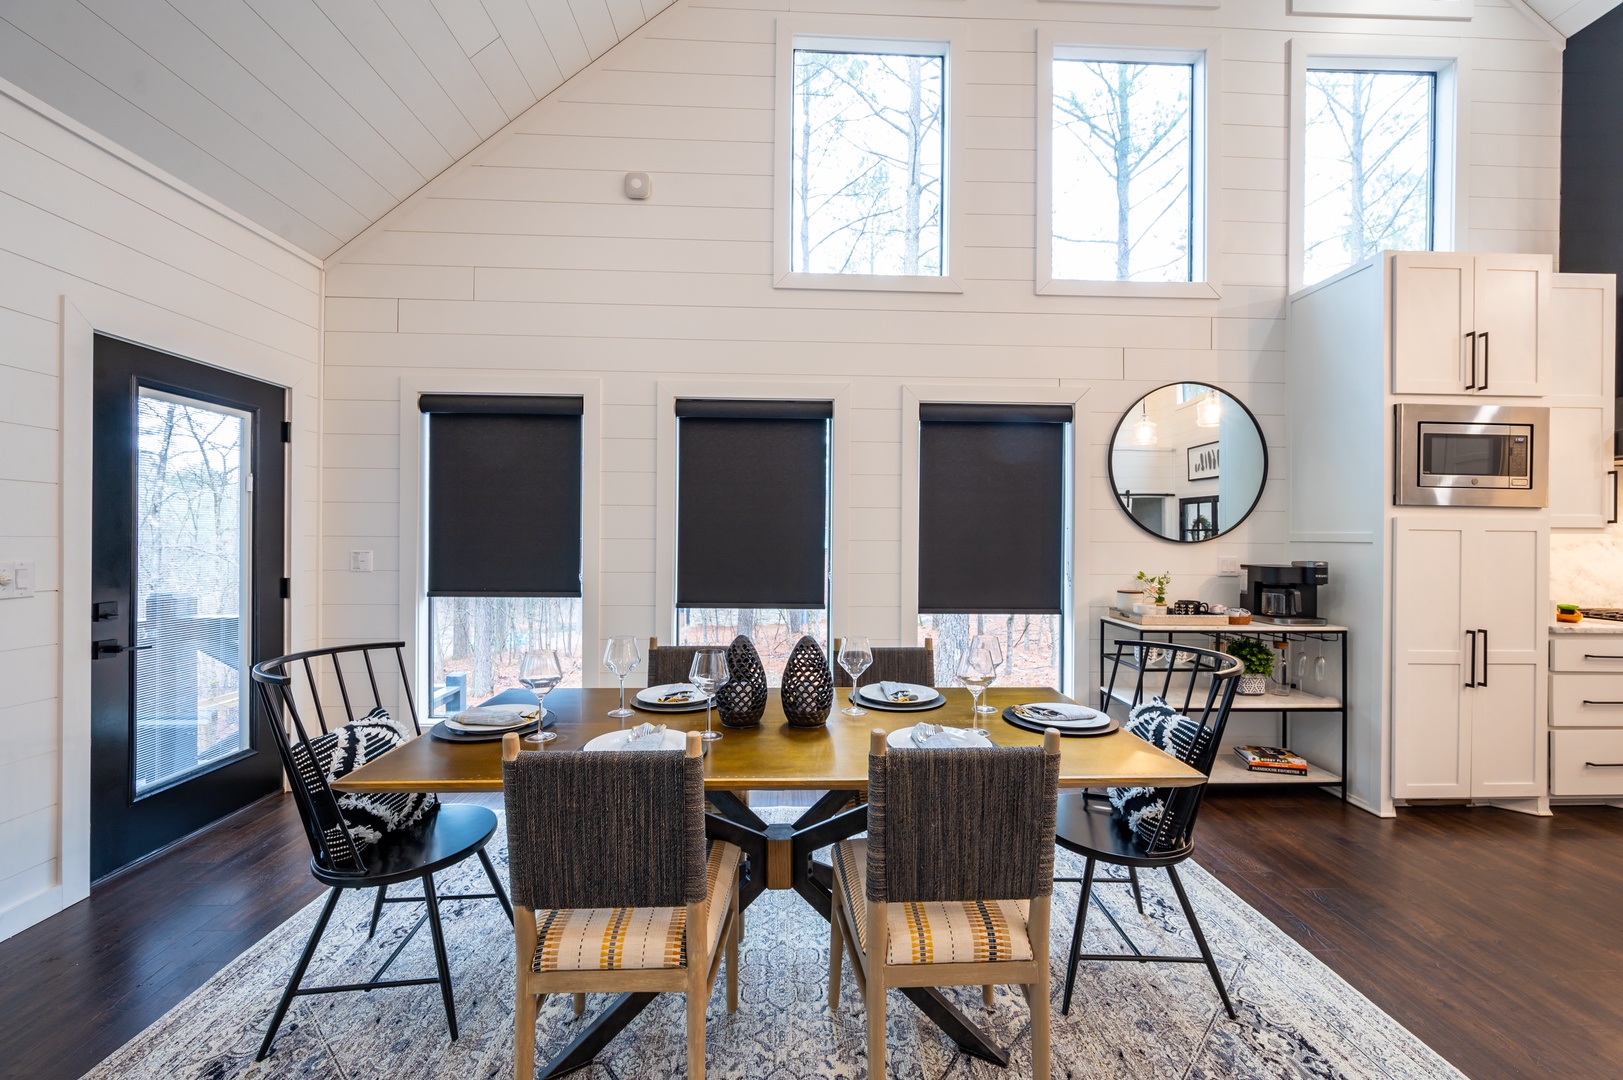 Dining table is surrounded by large windows and beautiful forest views